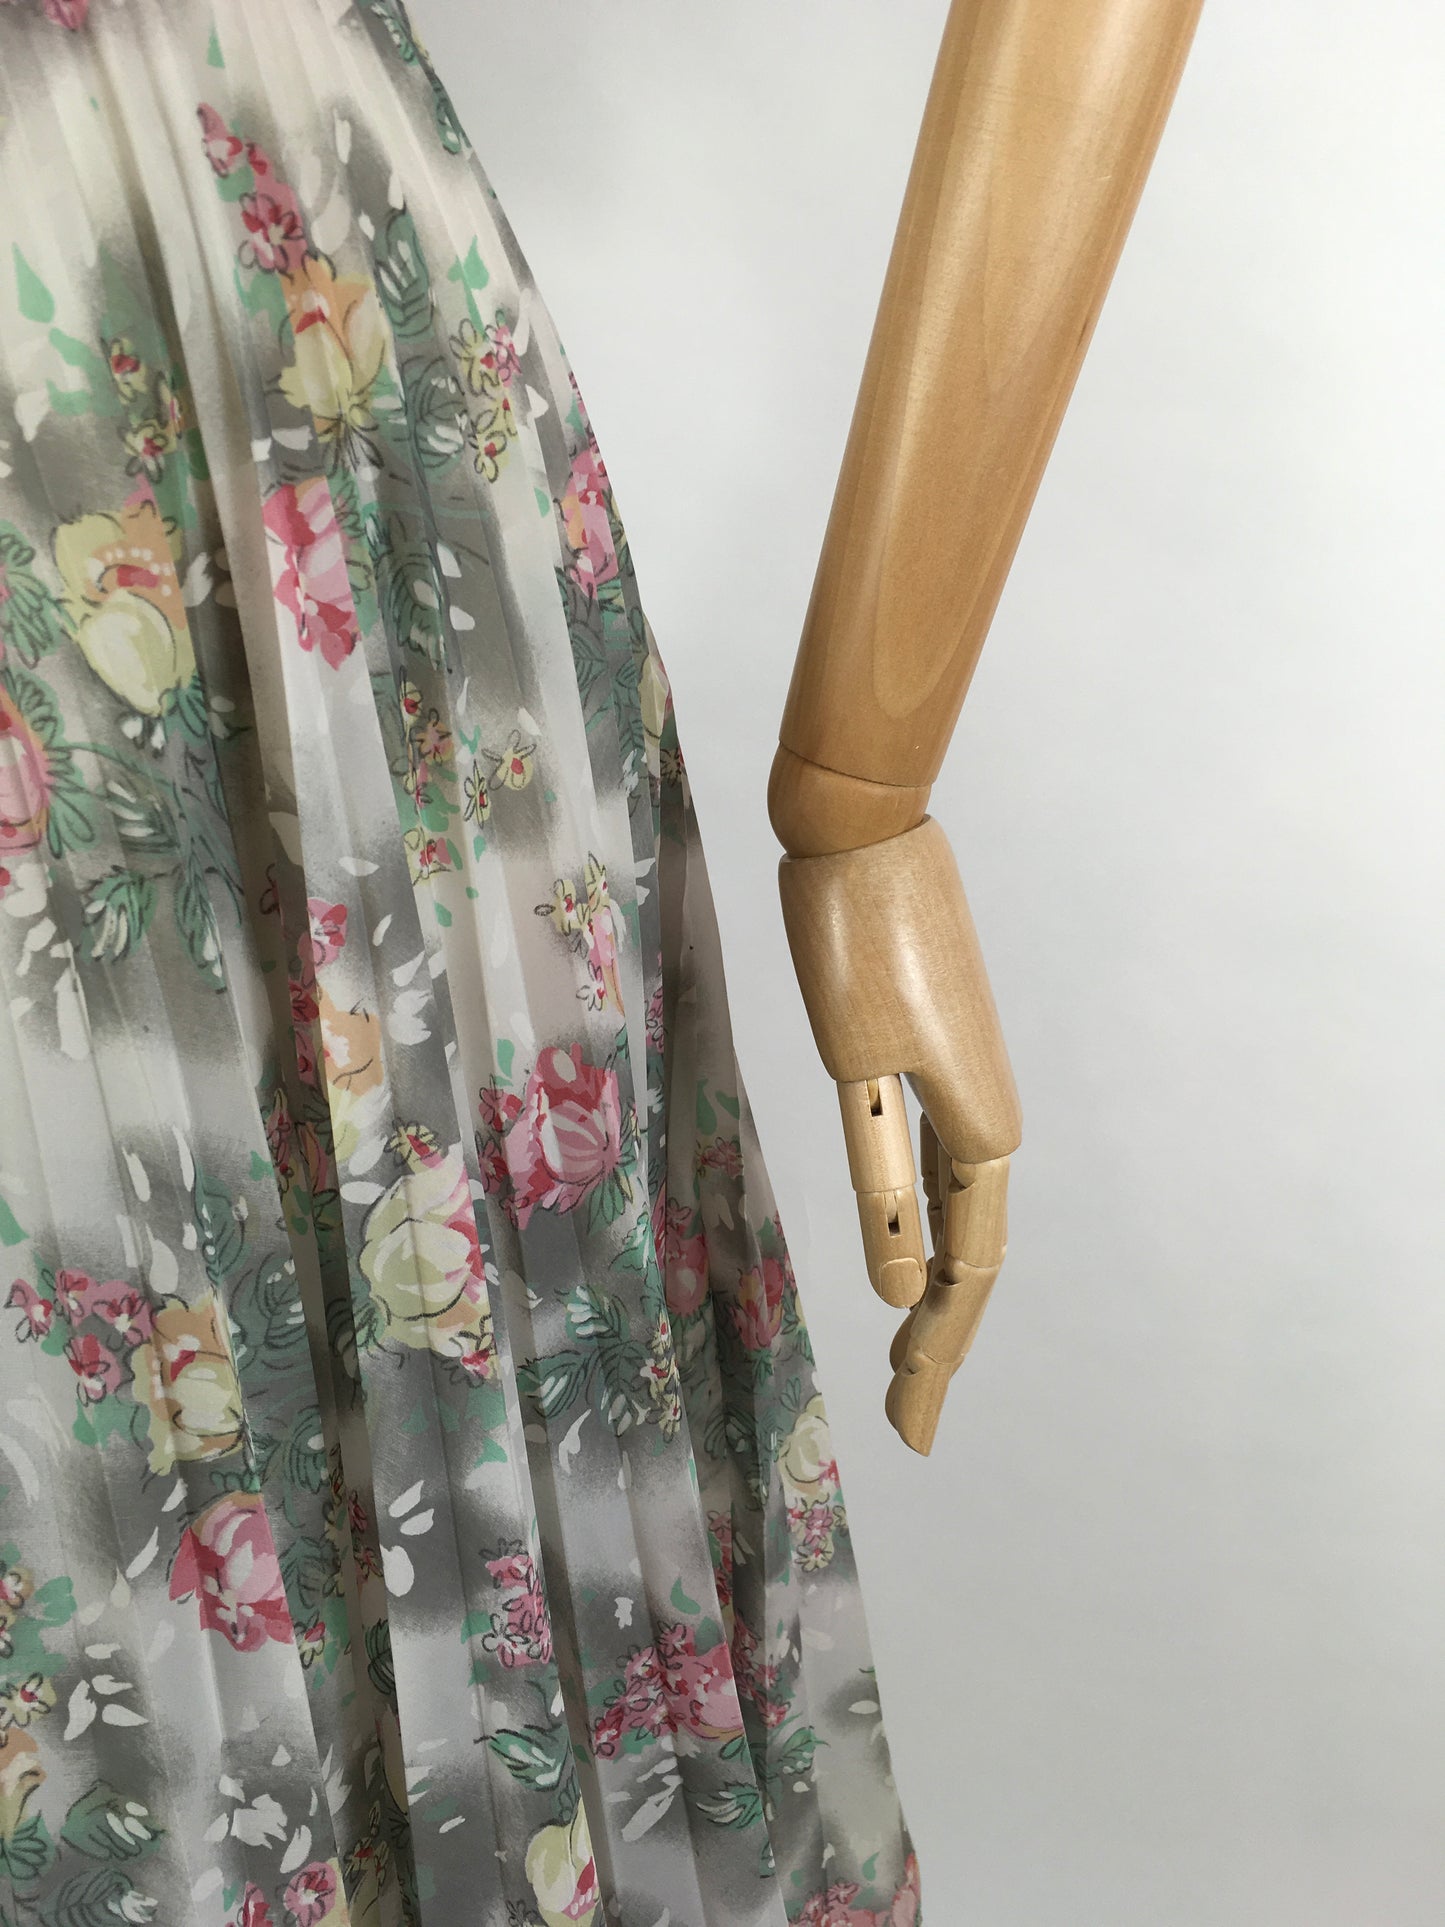 Original 1950s ‘ Eastex ‘ Floral Dress - In a Lovely Muted Colour Pallet of Soft Pinks, Muted Creams, Taupe and Greys